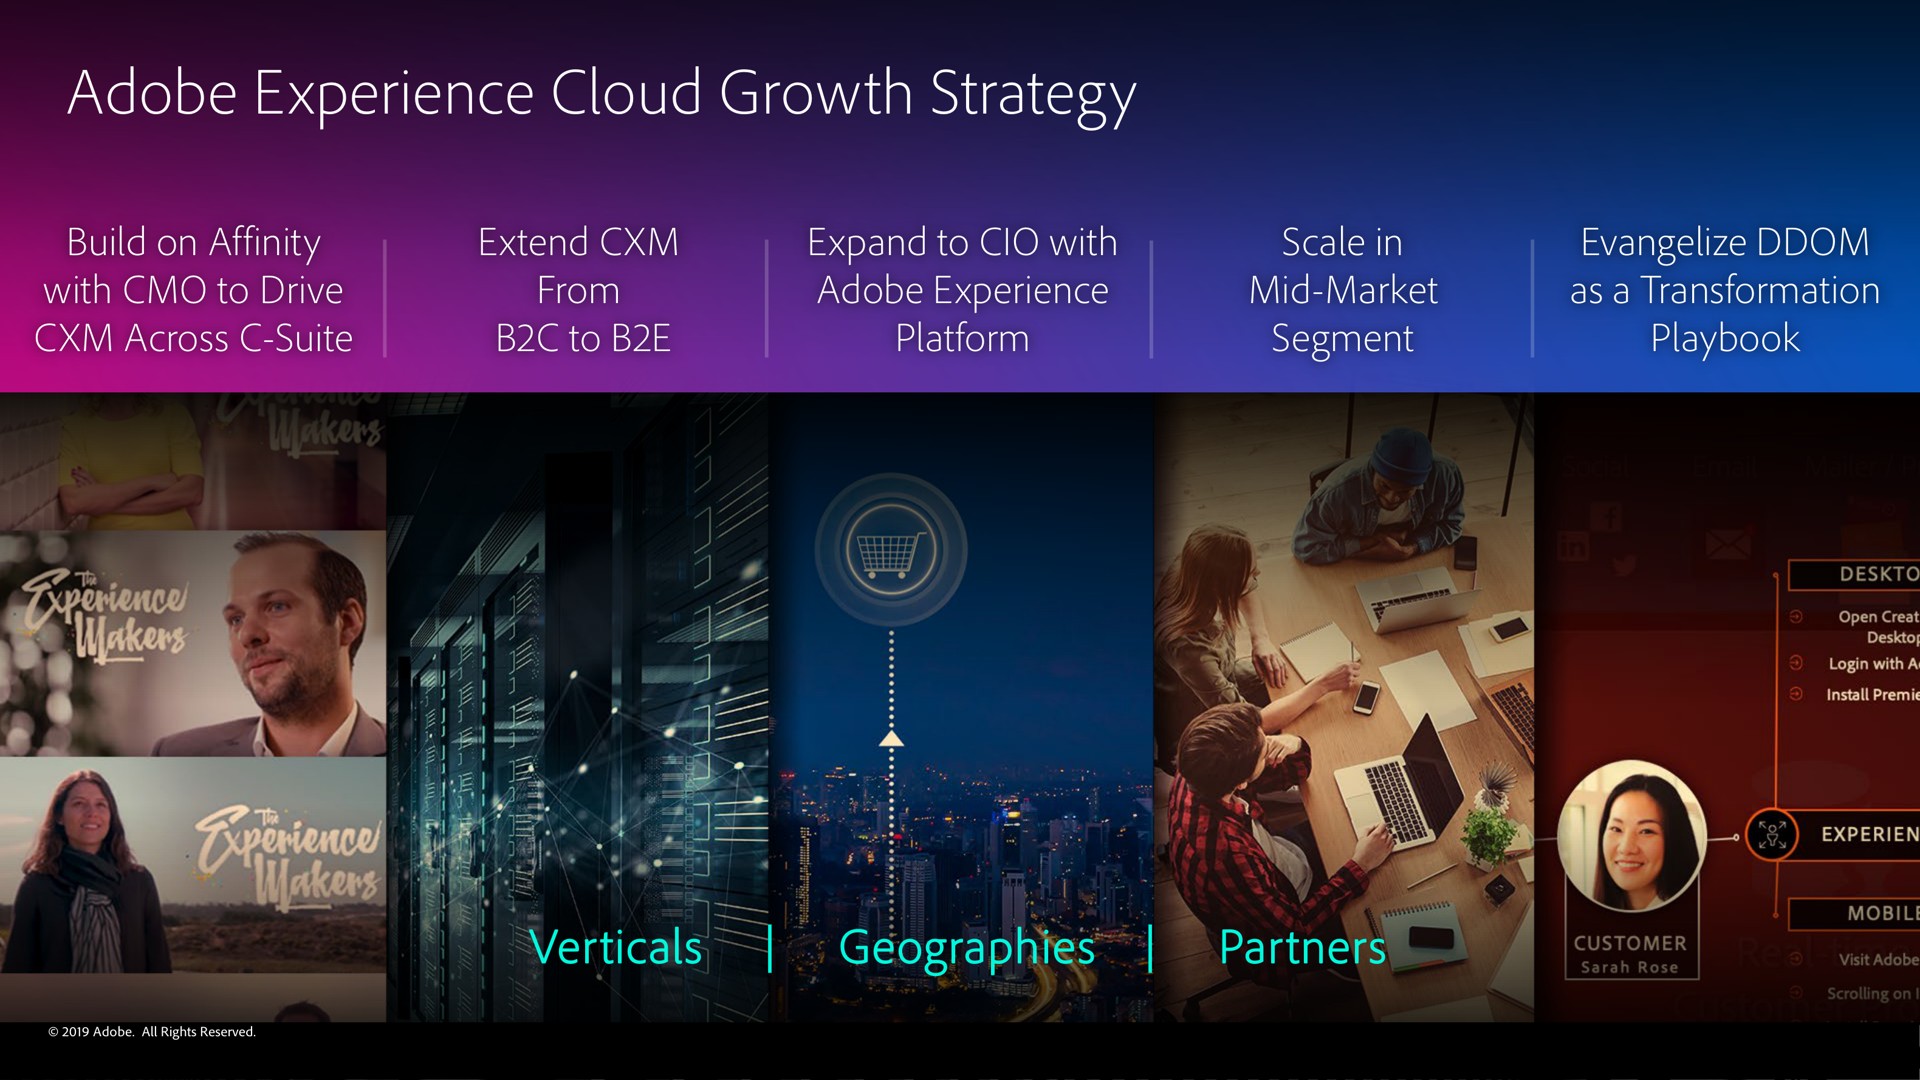 adobe experience cloud growth strategy | Adobe